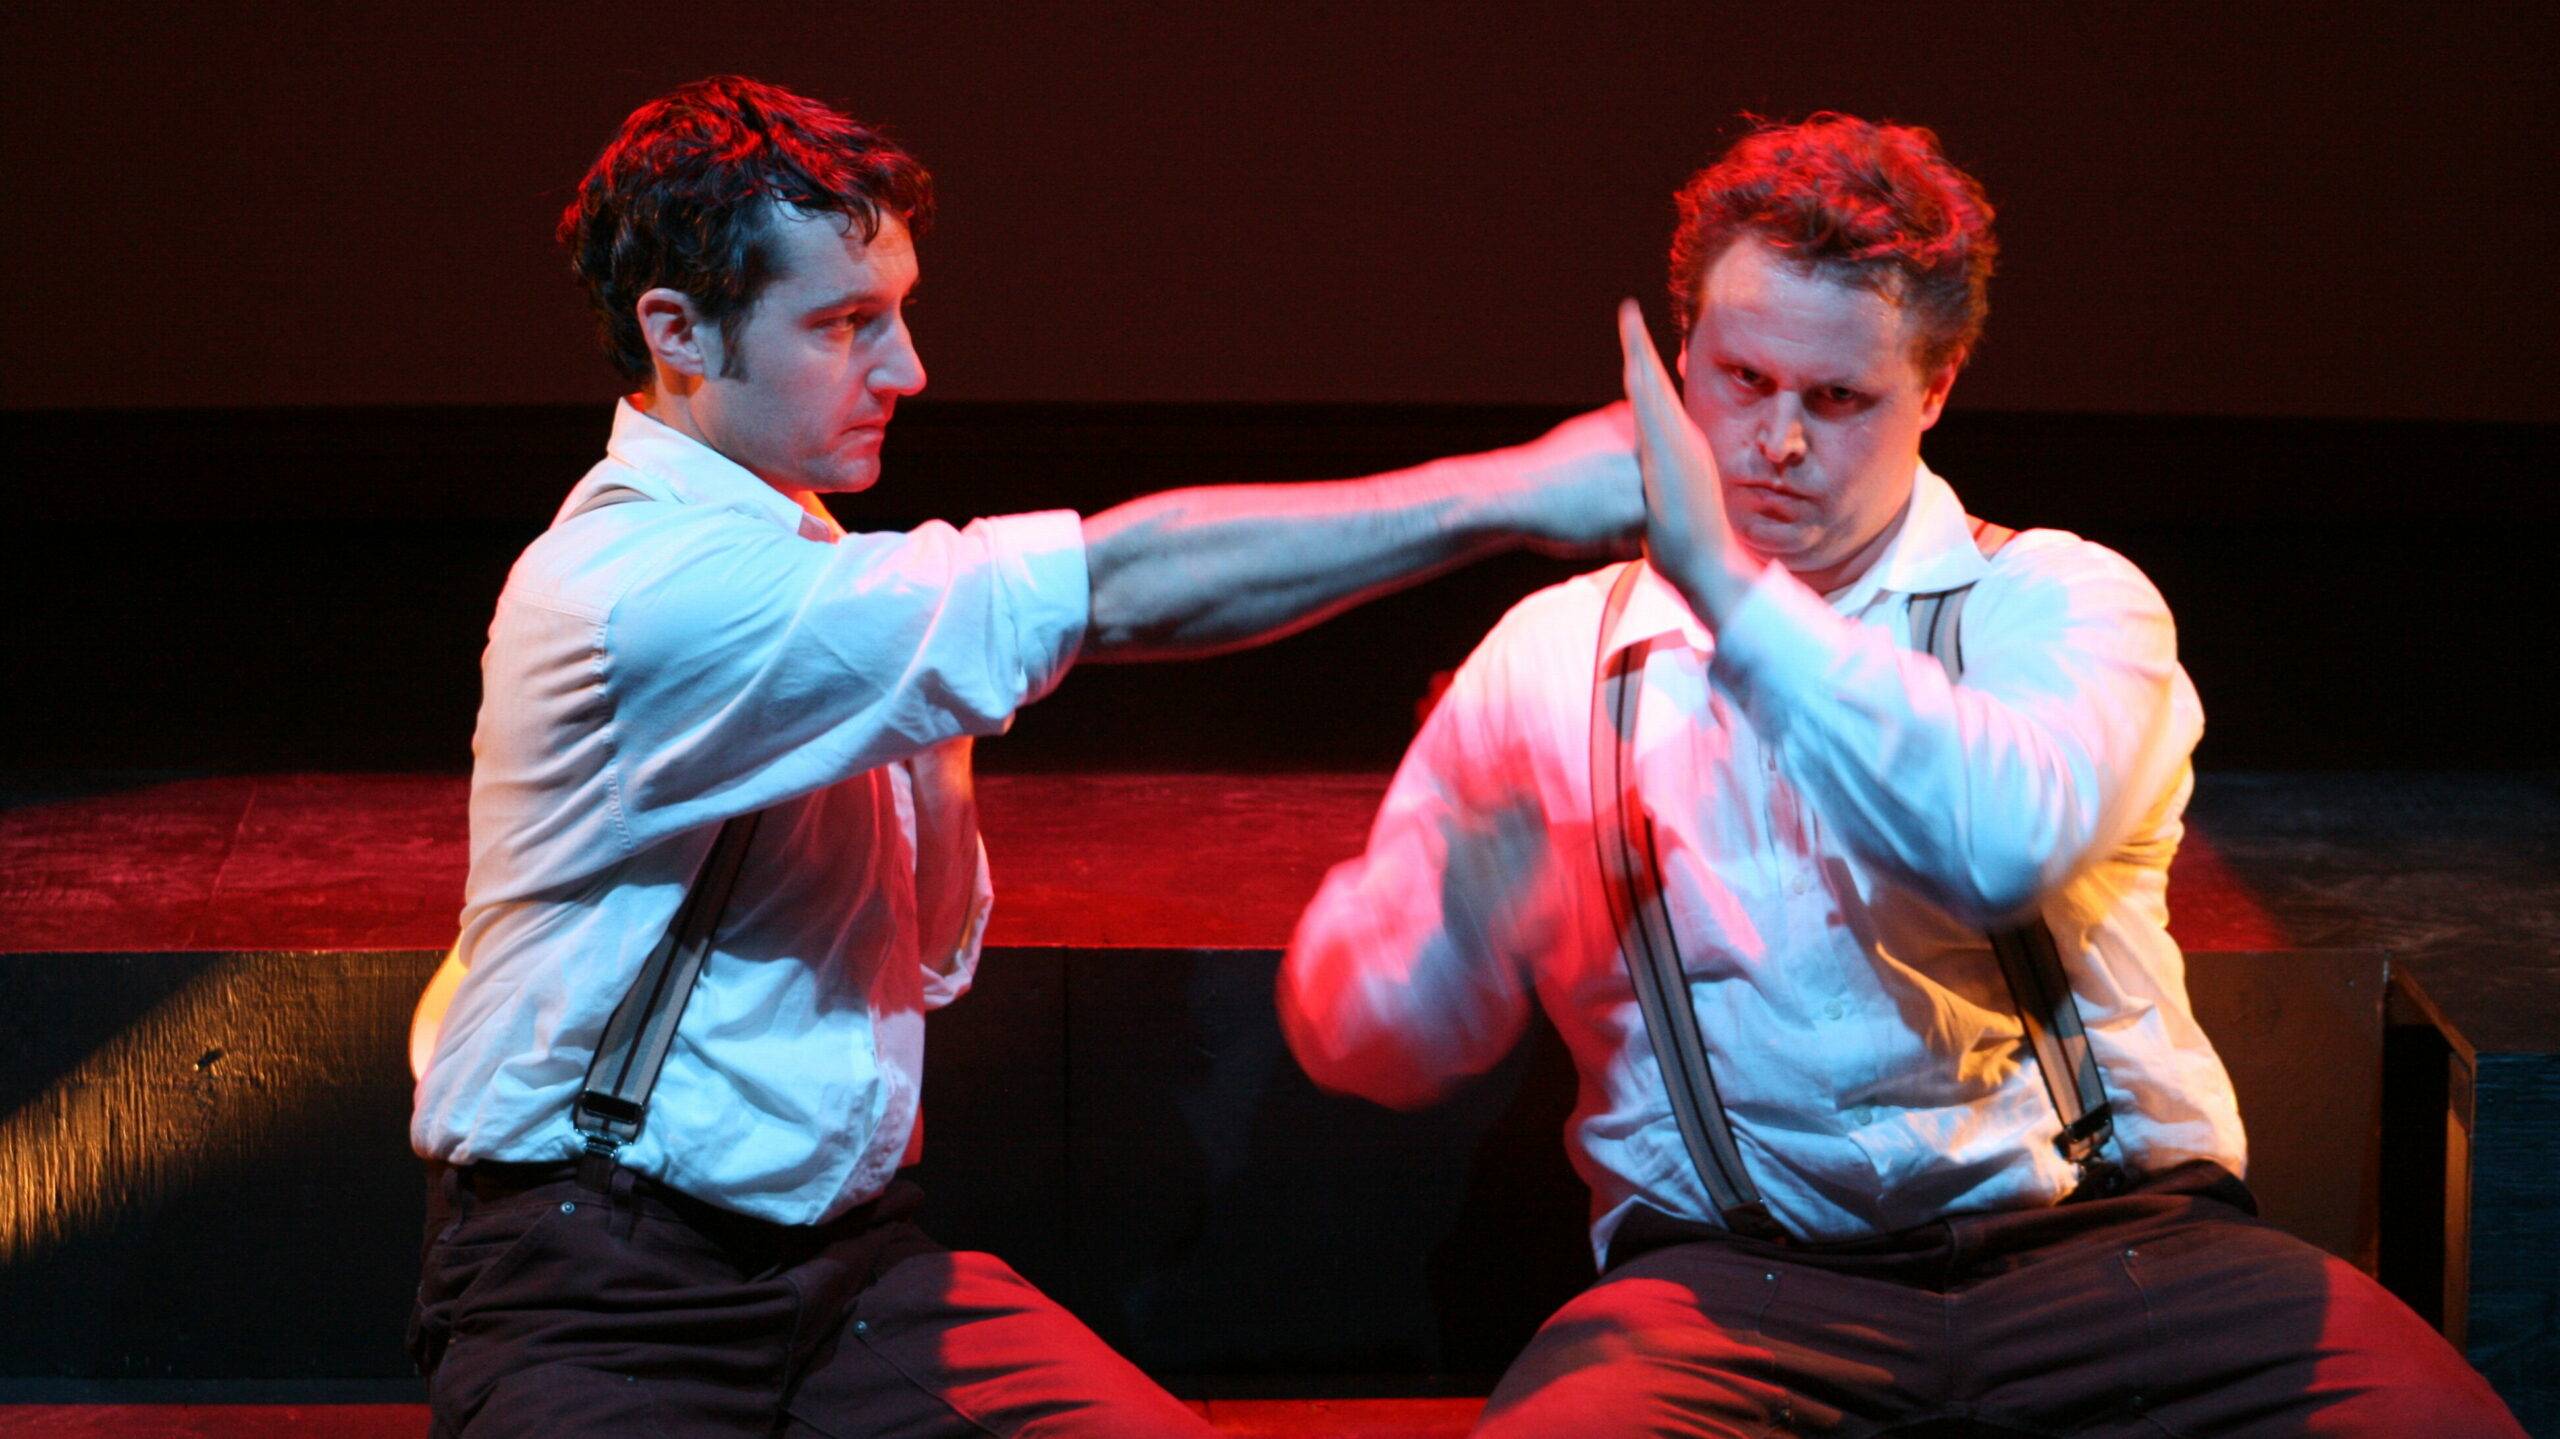 A man punching another on a red stage.